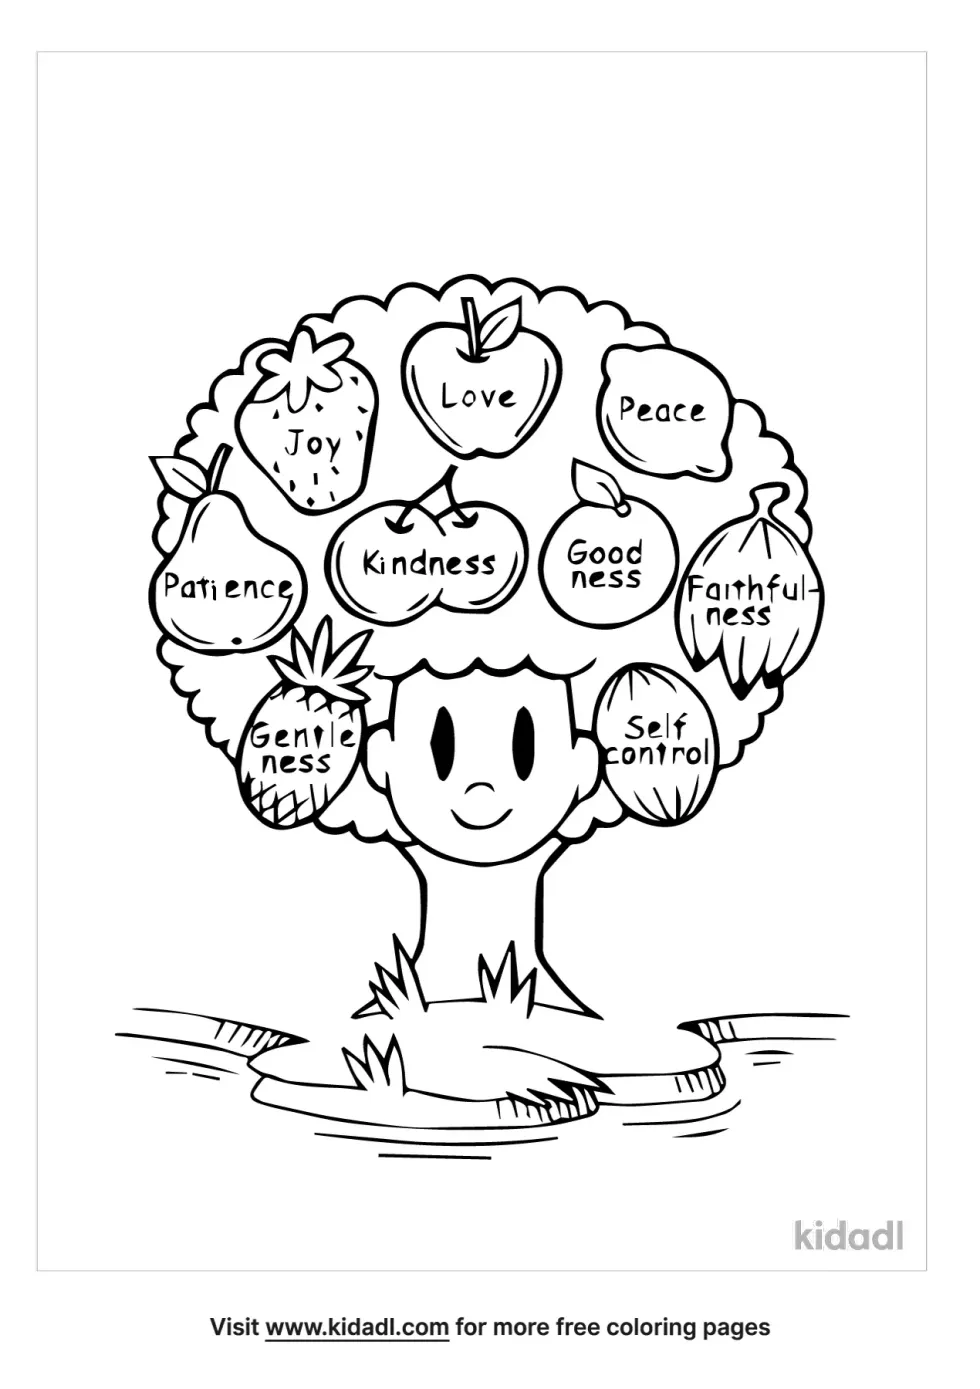 Cute Fruit Of The Spirit Coloring Page